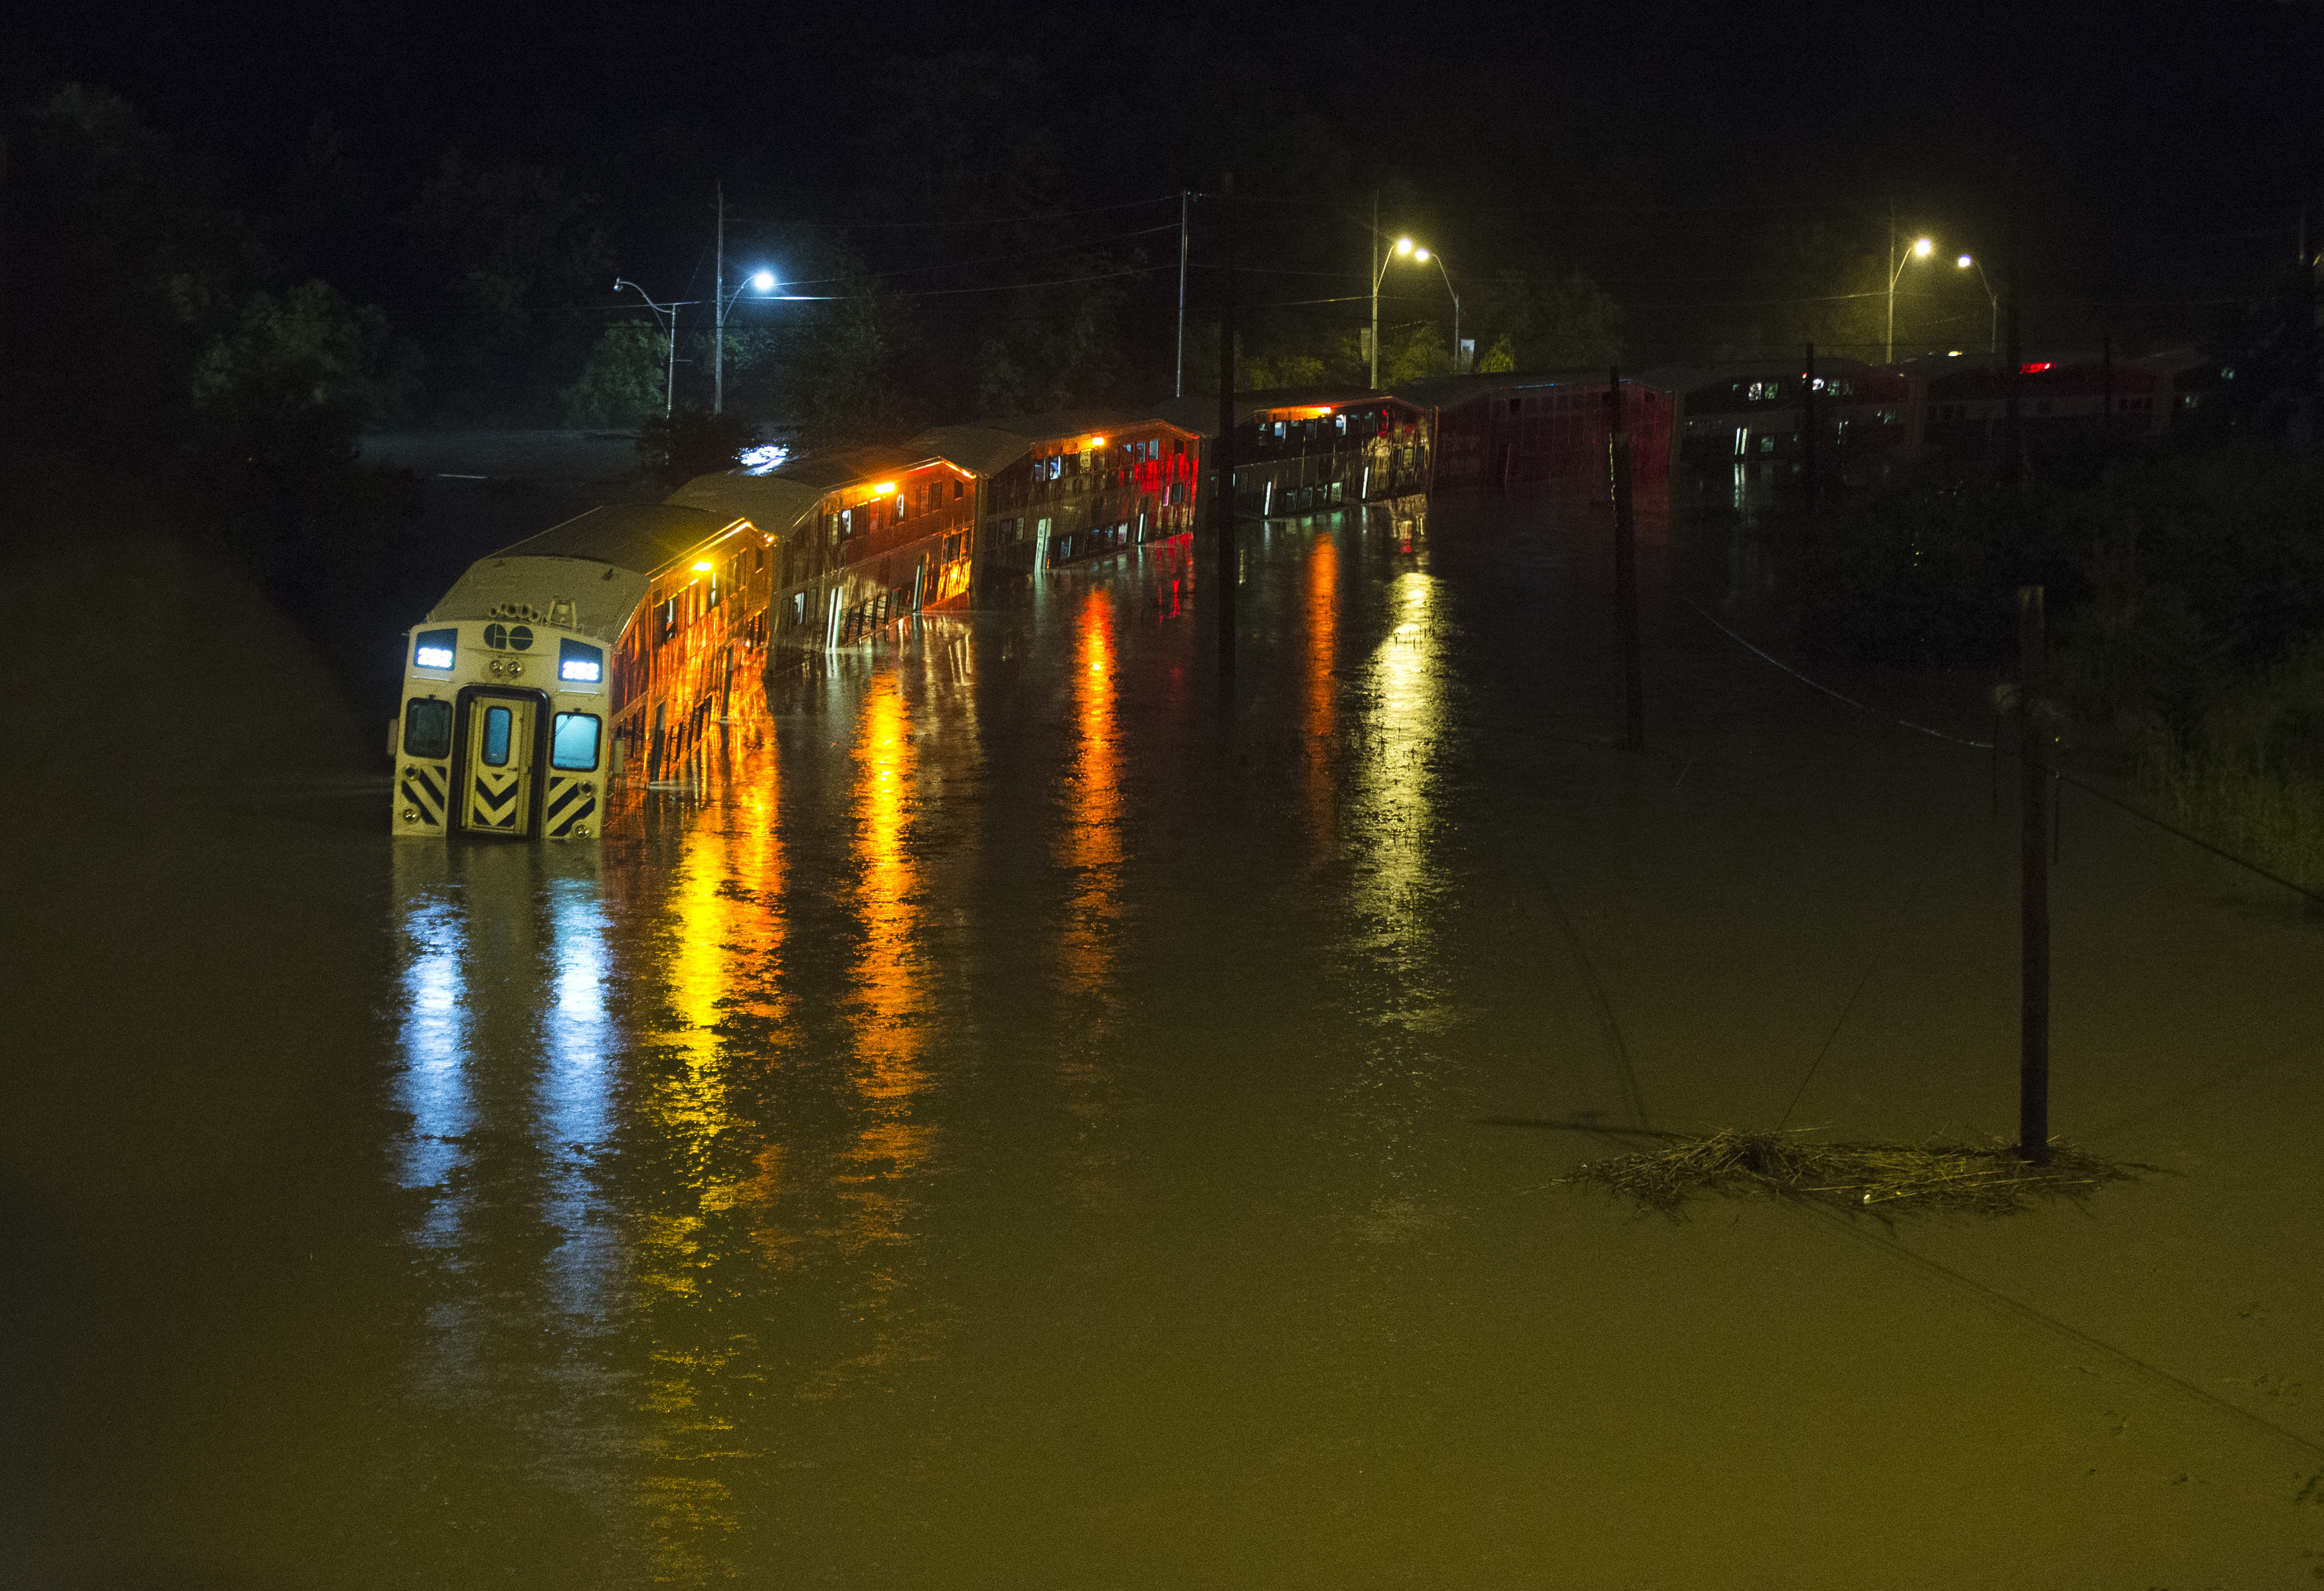 A Go Train, a commuter train, with passengers waiting to be rescued inside, is stuck in flood waters during a heavy rainstorm in Toronto, July 8, 2013.    REUTERS/Mark Blinch